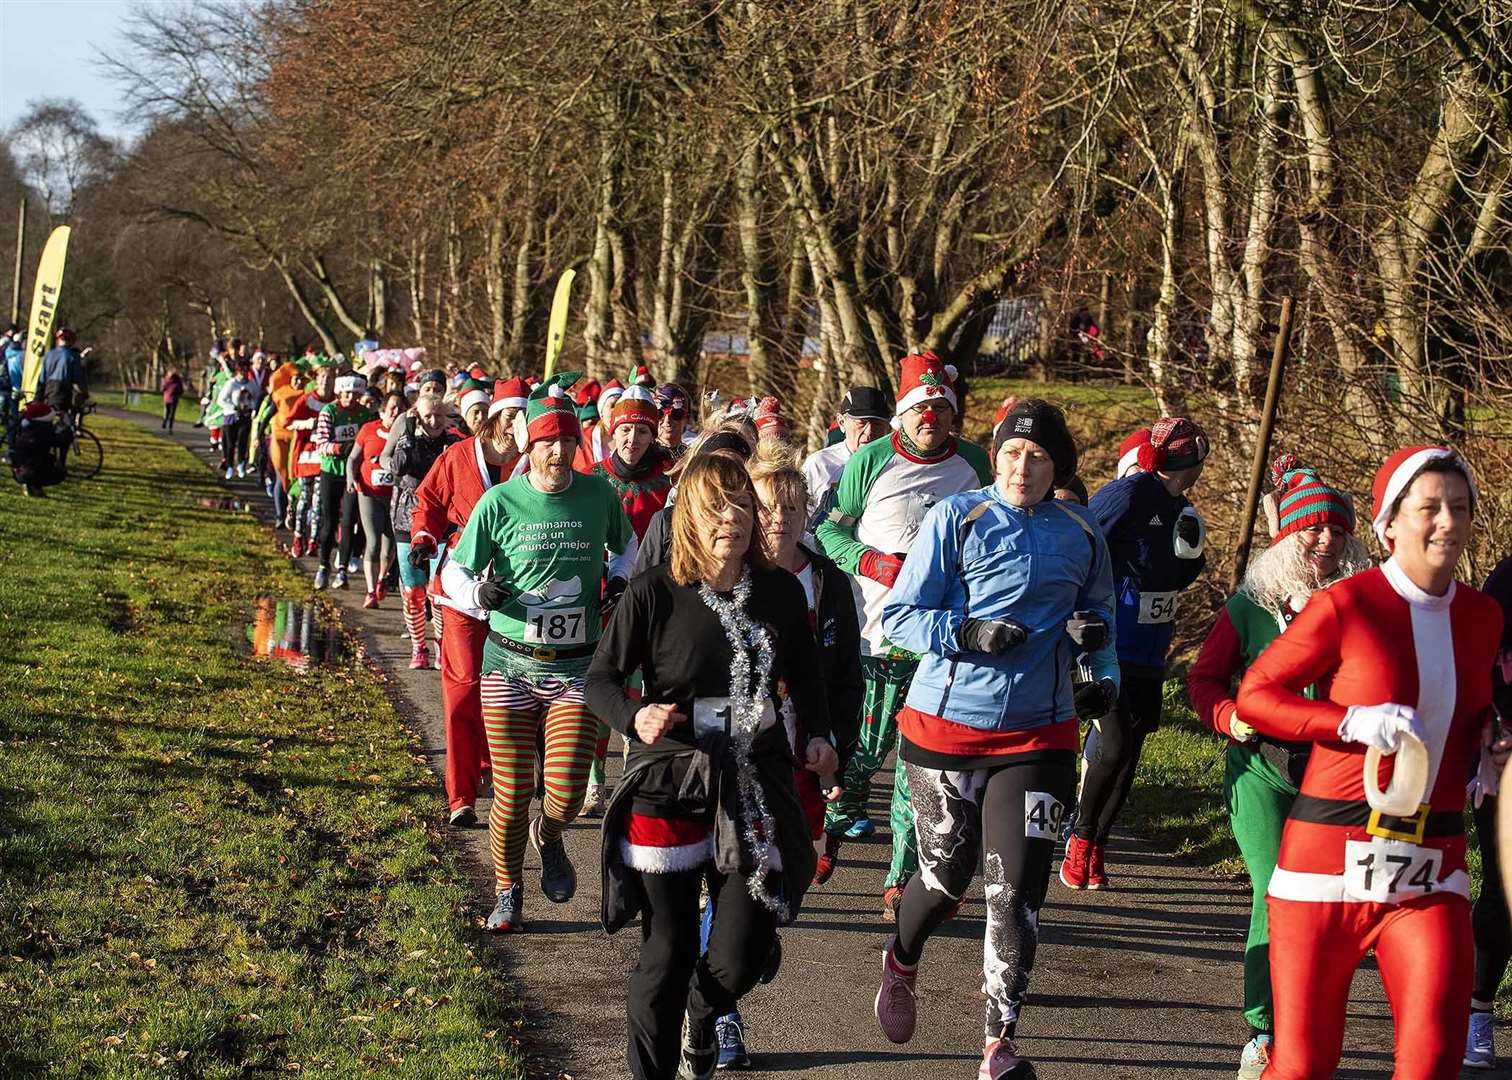 The 2019 Tinsel Trot drew a large crowd and organisers hope for a large online participation this year.